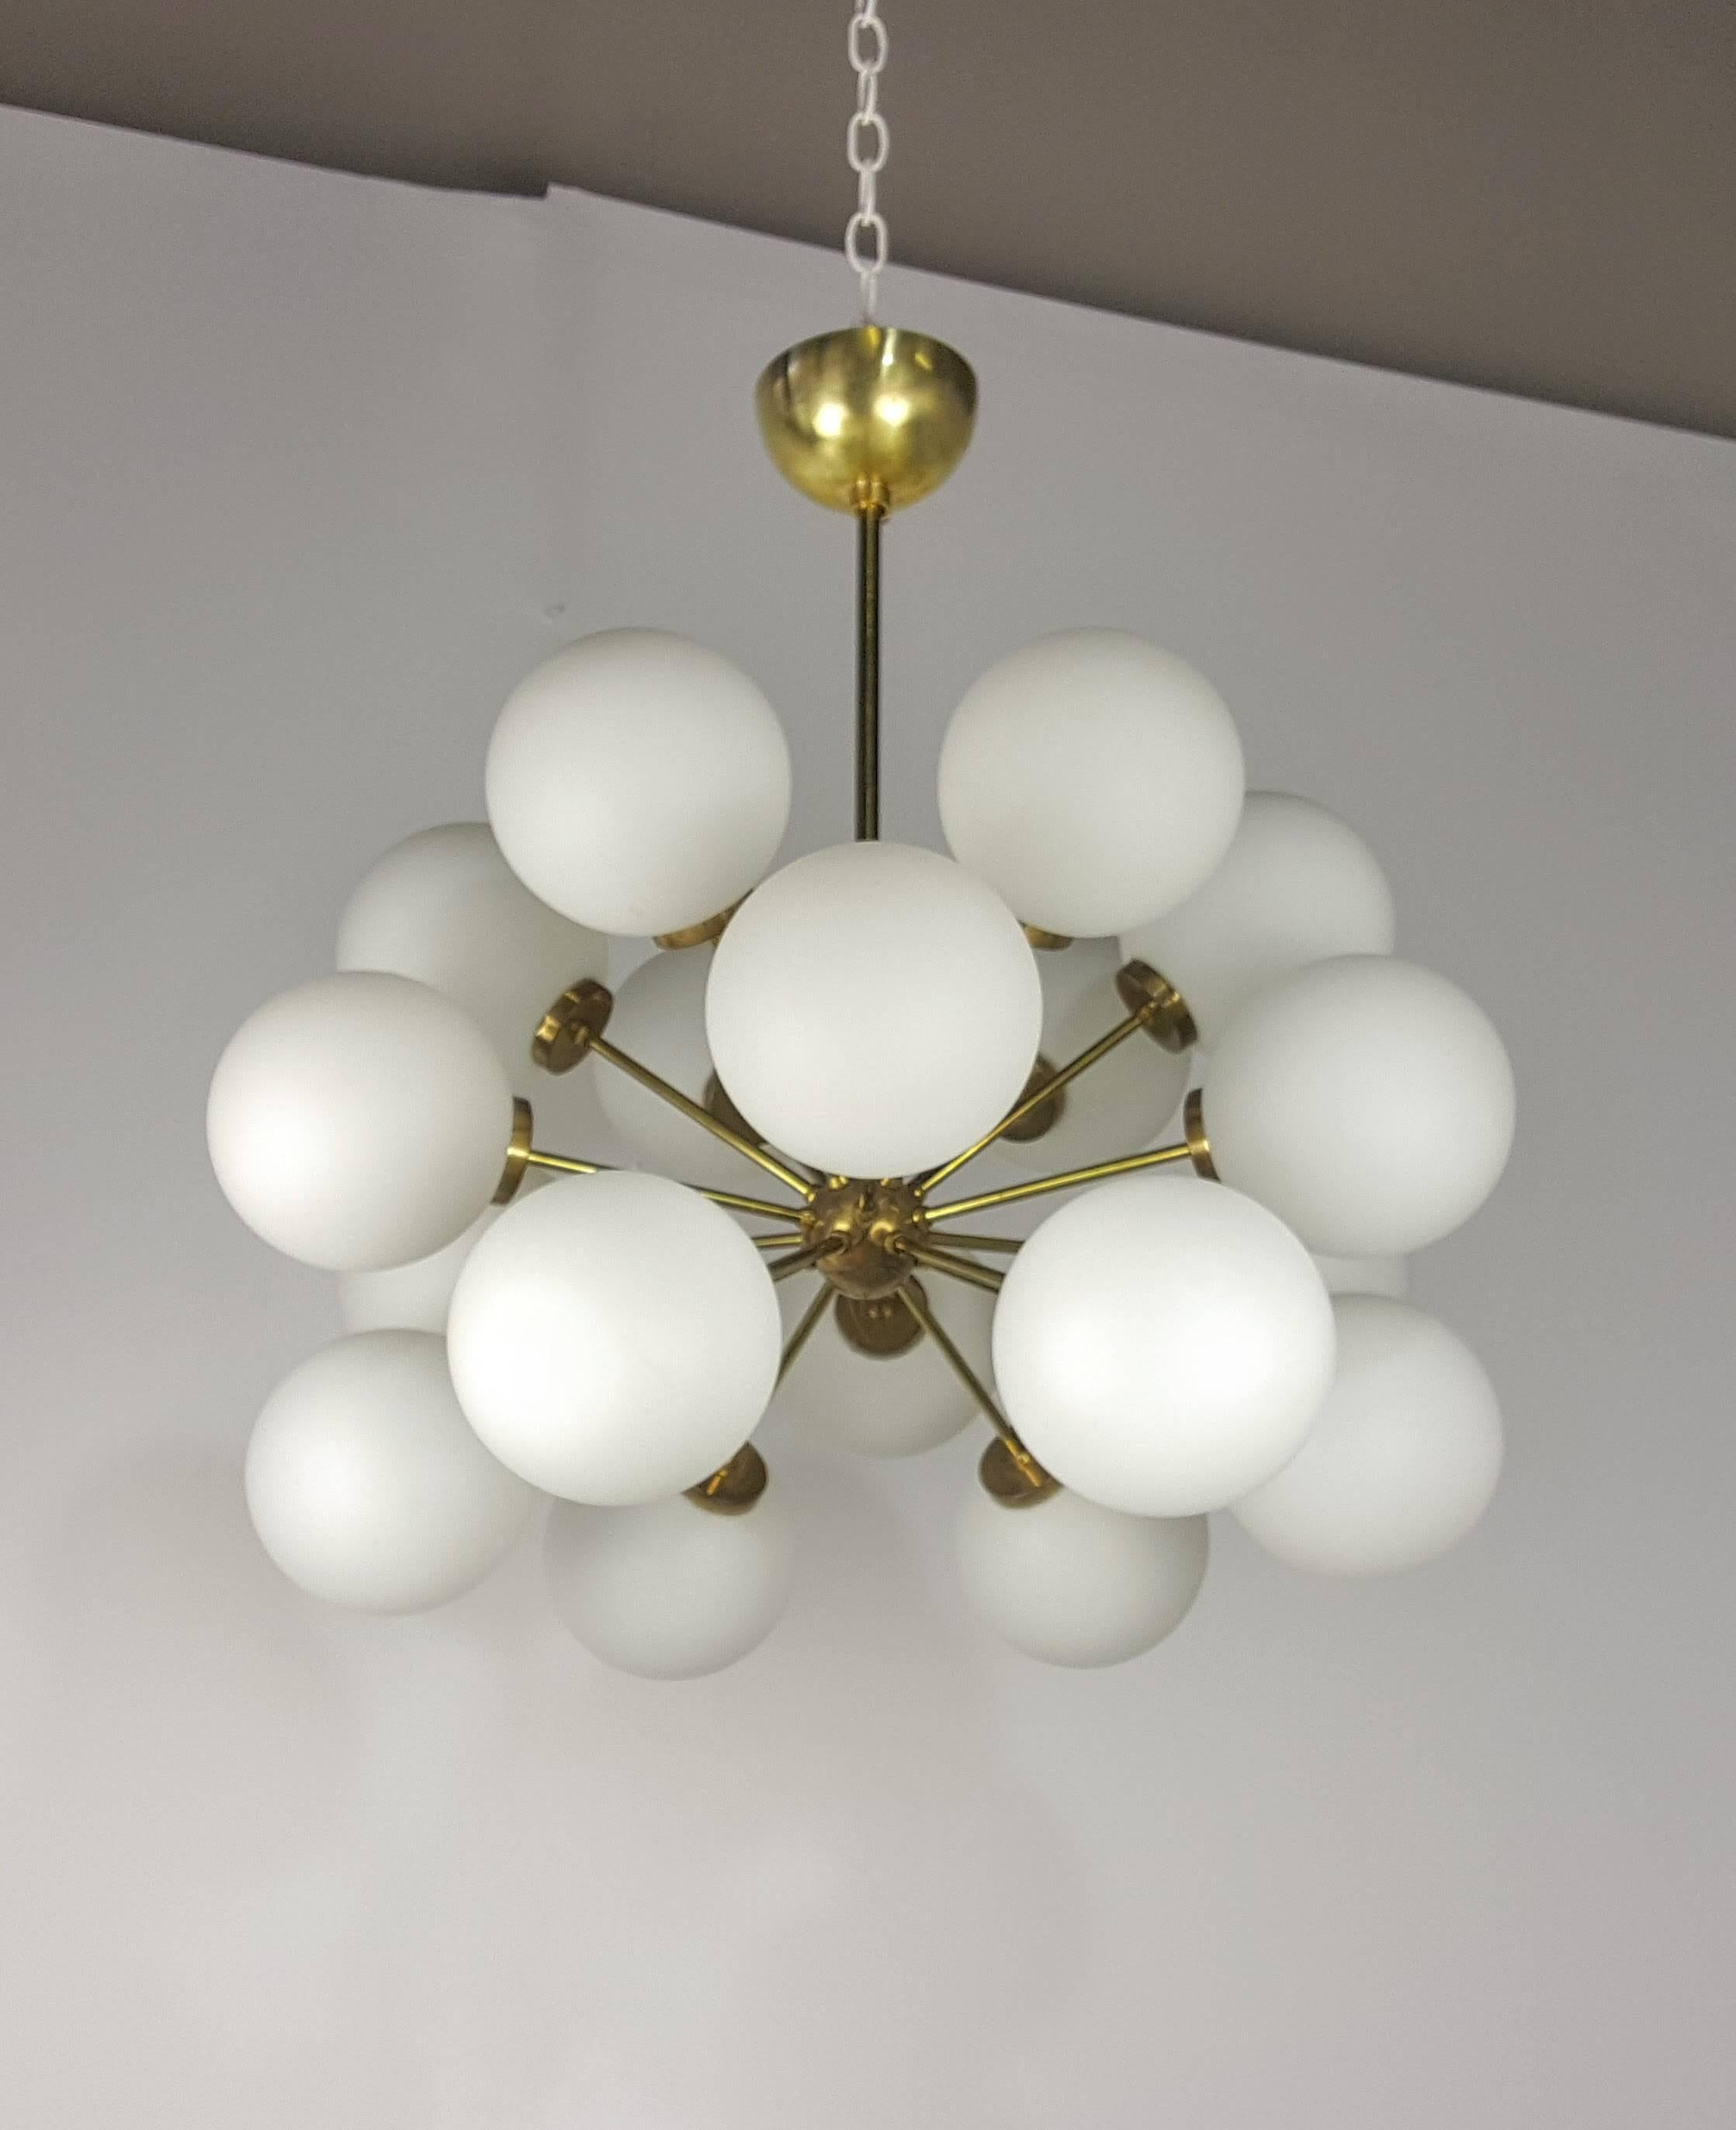 Gorgeous eighteen-globe Sputnik chandelier, Italy, 1970s.

We offer free regular deliveries to NYC and Philadelphia area. Delivery to DC, MD, CT and MA are available if schedule permits, please message for a location-based delivery quote.